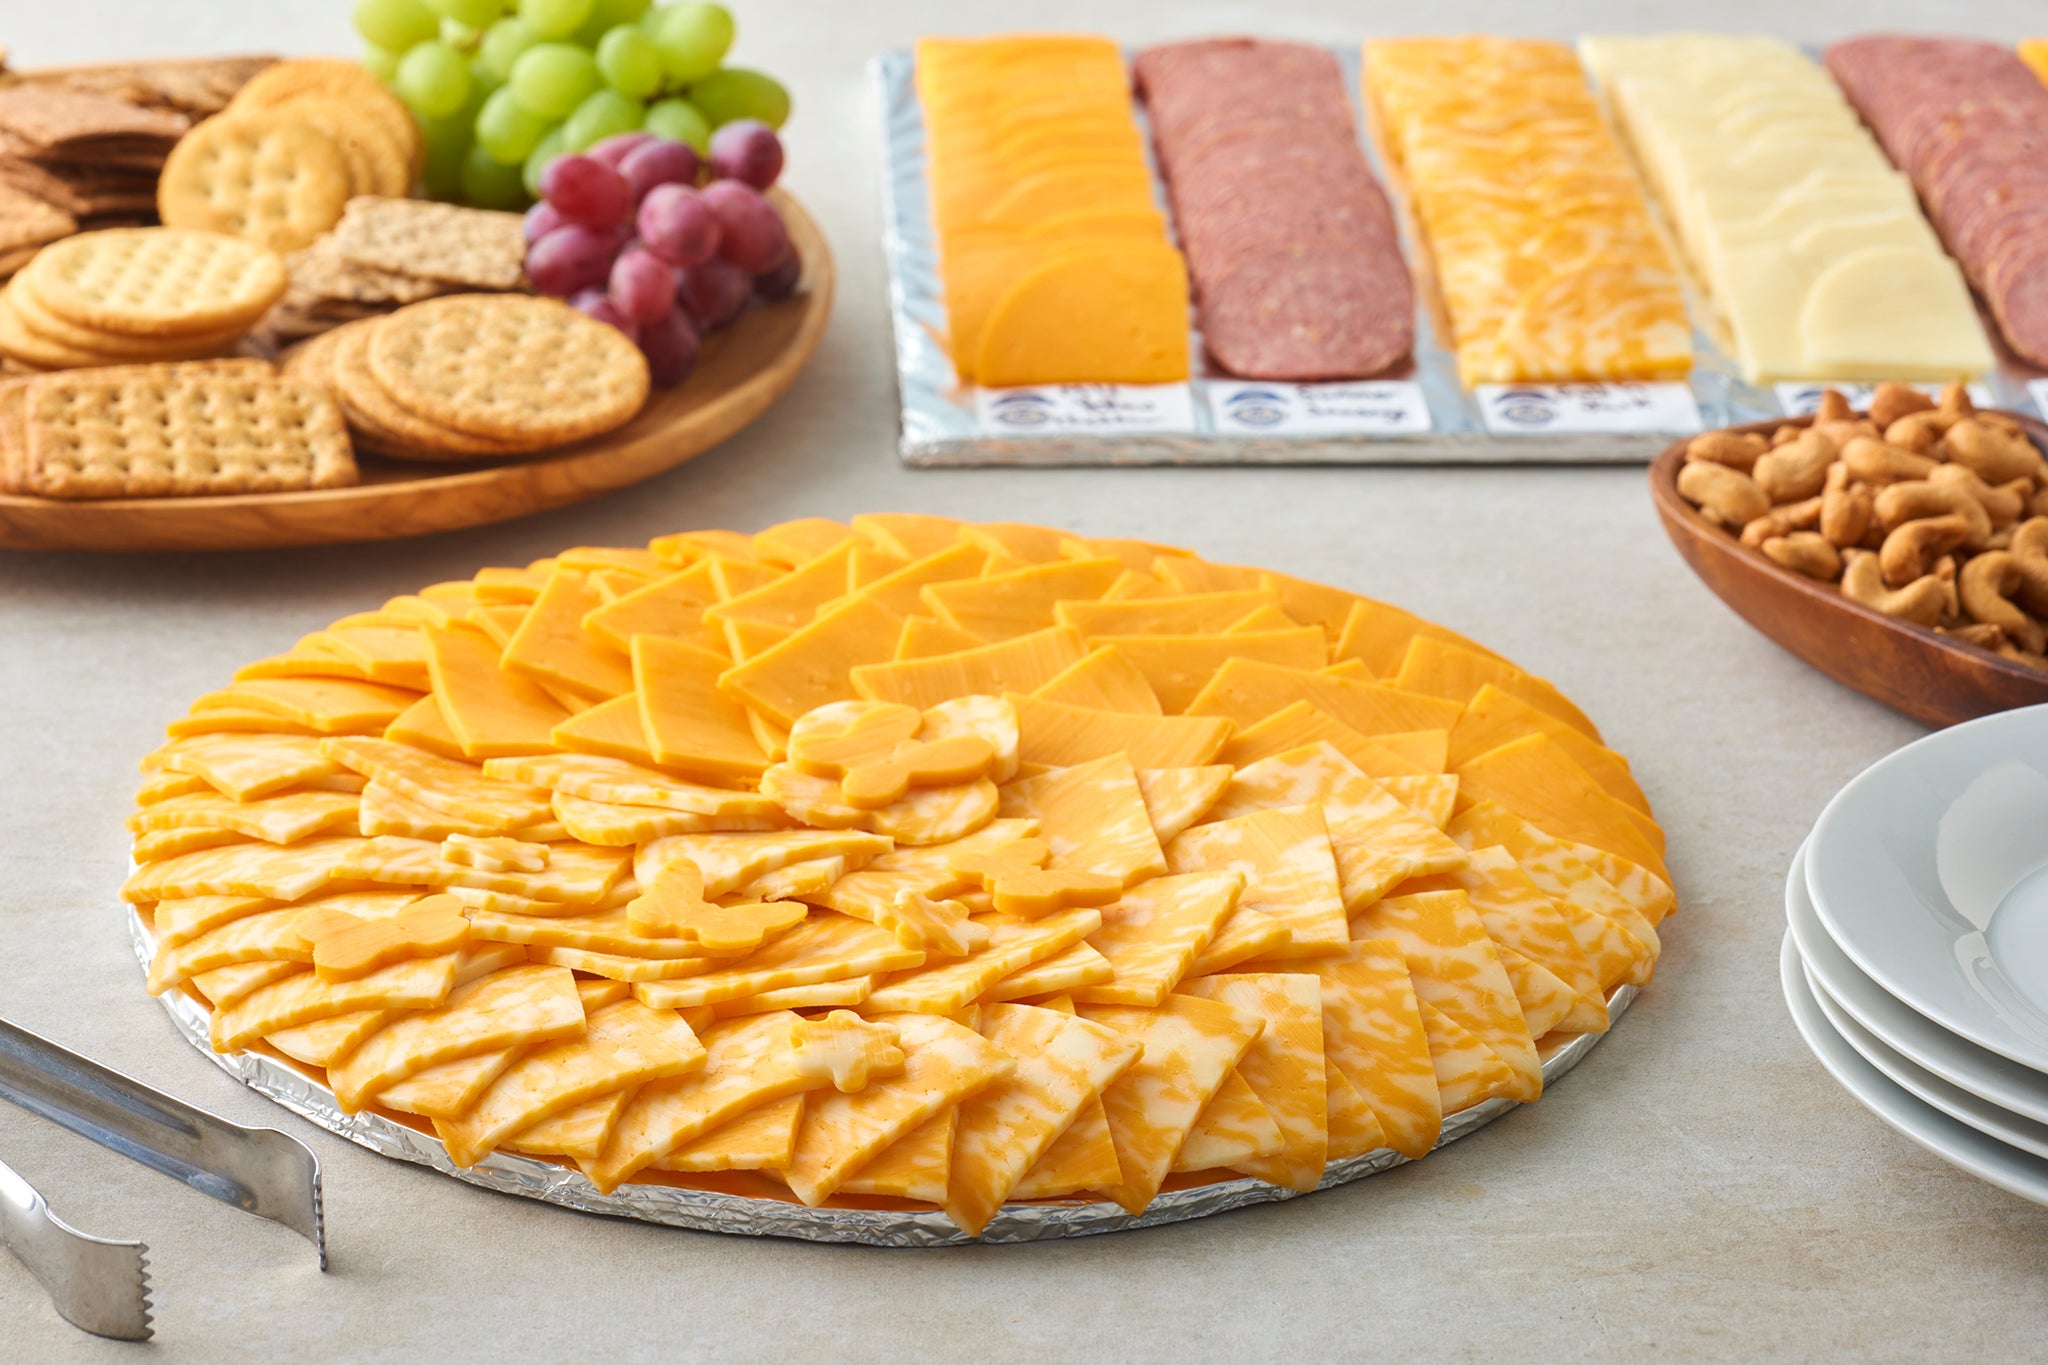 Cheese Trays